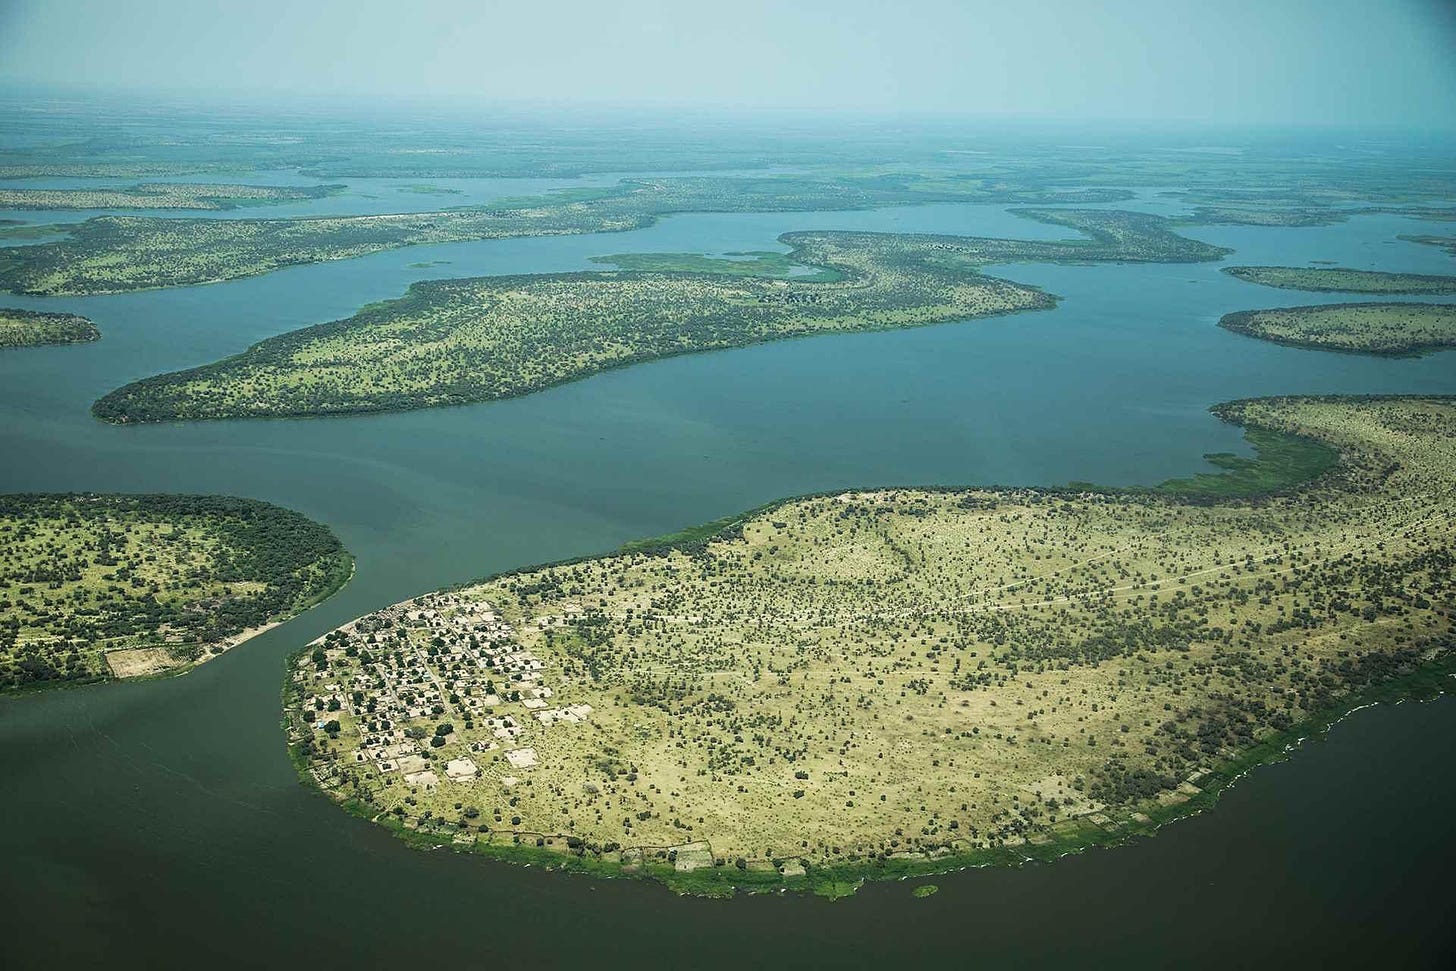 Battle For Control Of Lake Chad Islands, Resources - HumAngle Media